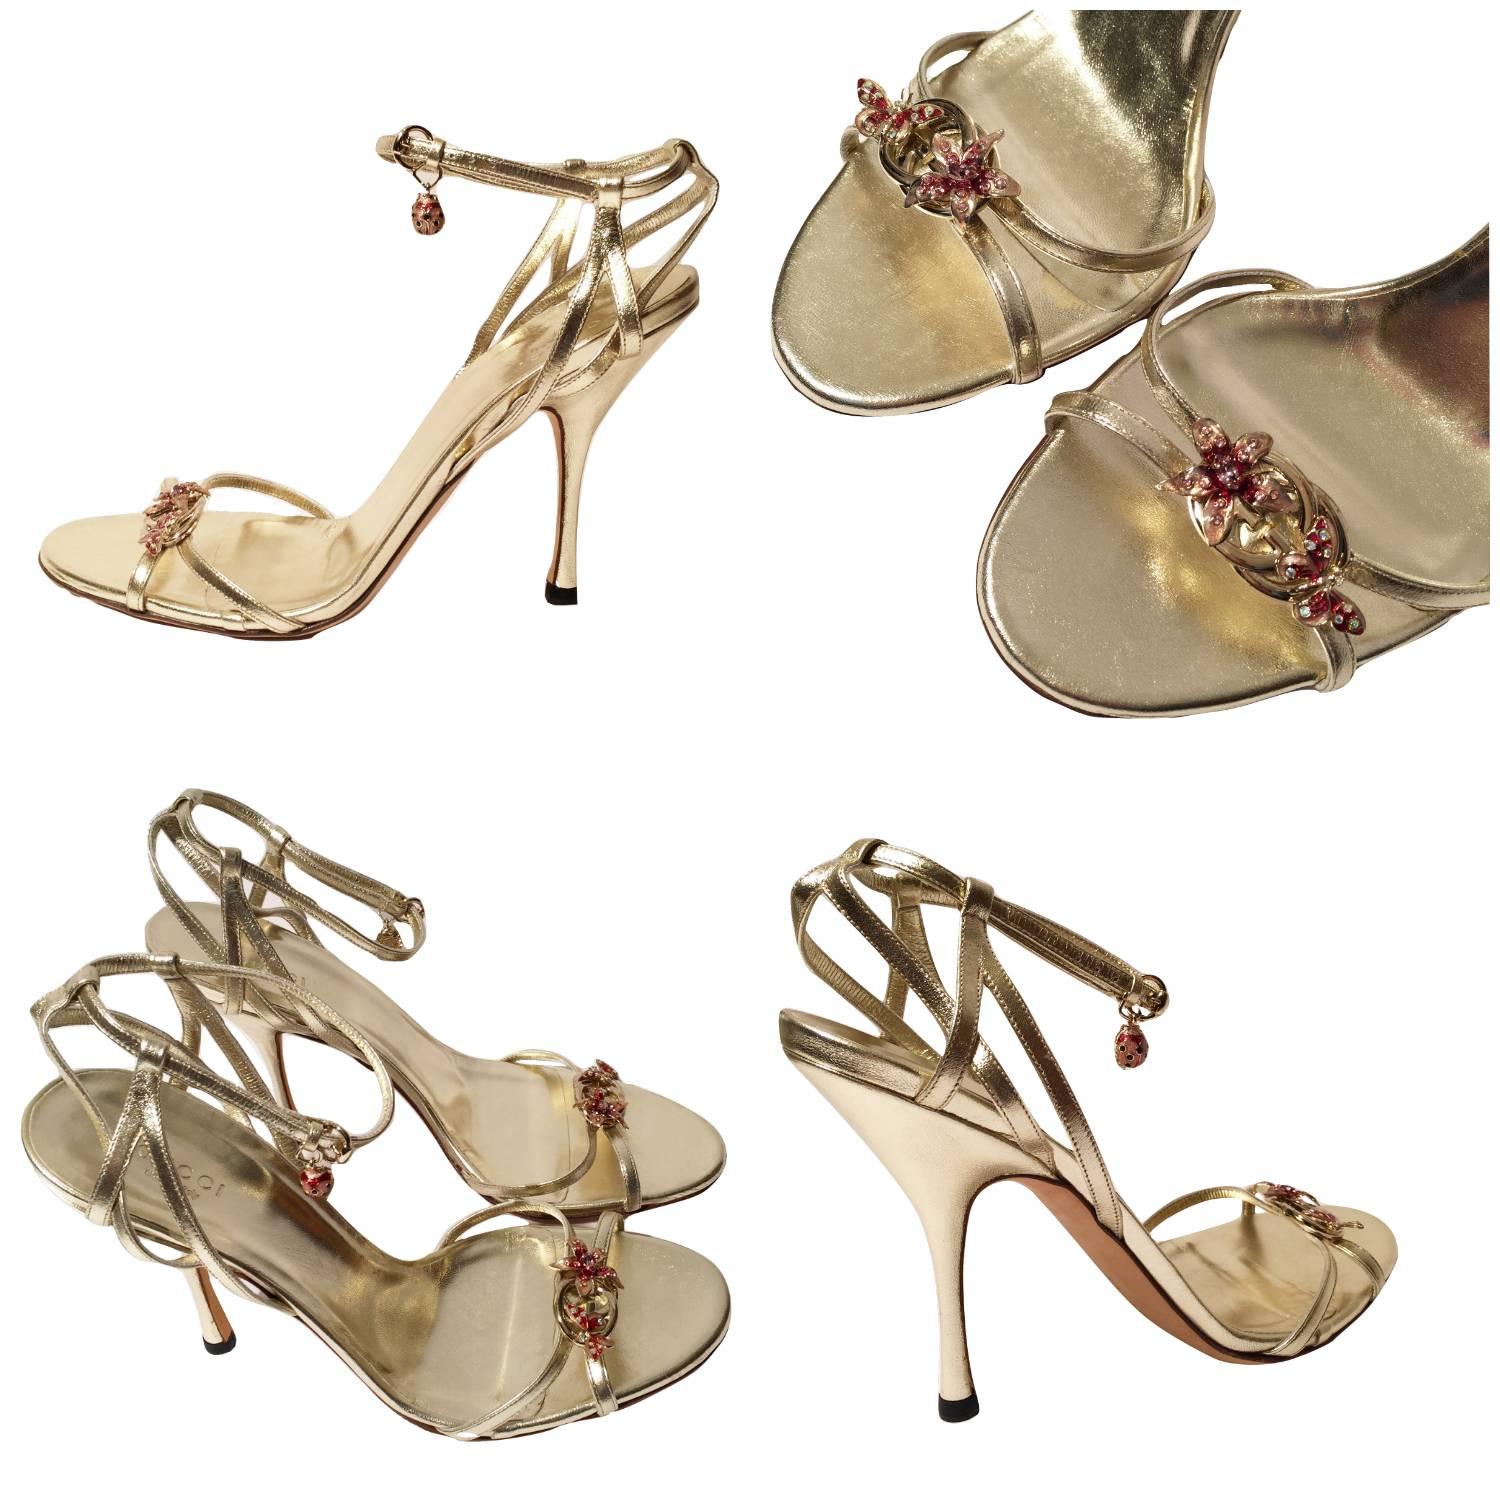 Lt. Edition Gucci Heels
Brand New
* Stunning in Gold Leather
* Flower & Butterfly Jeweled Toe
* Lady Bug Dangle Jewel
* Size: 9.5
* Adjustable Ankle Strap 
* Leather Insole
* 4.5